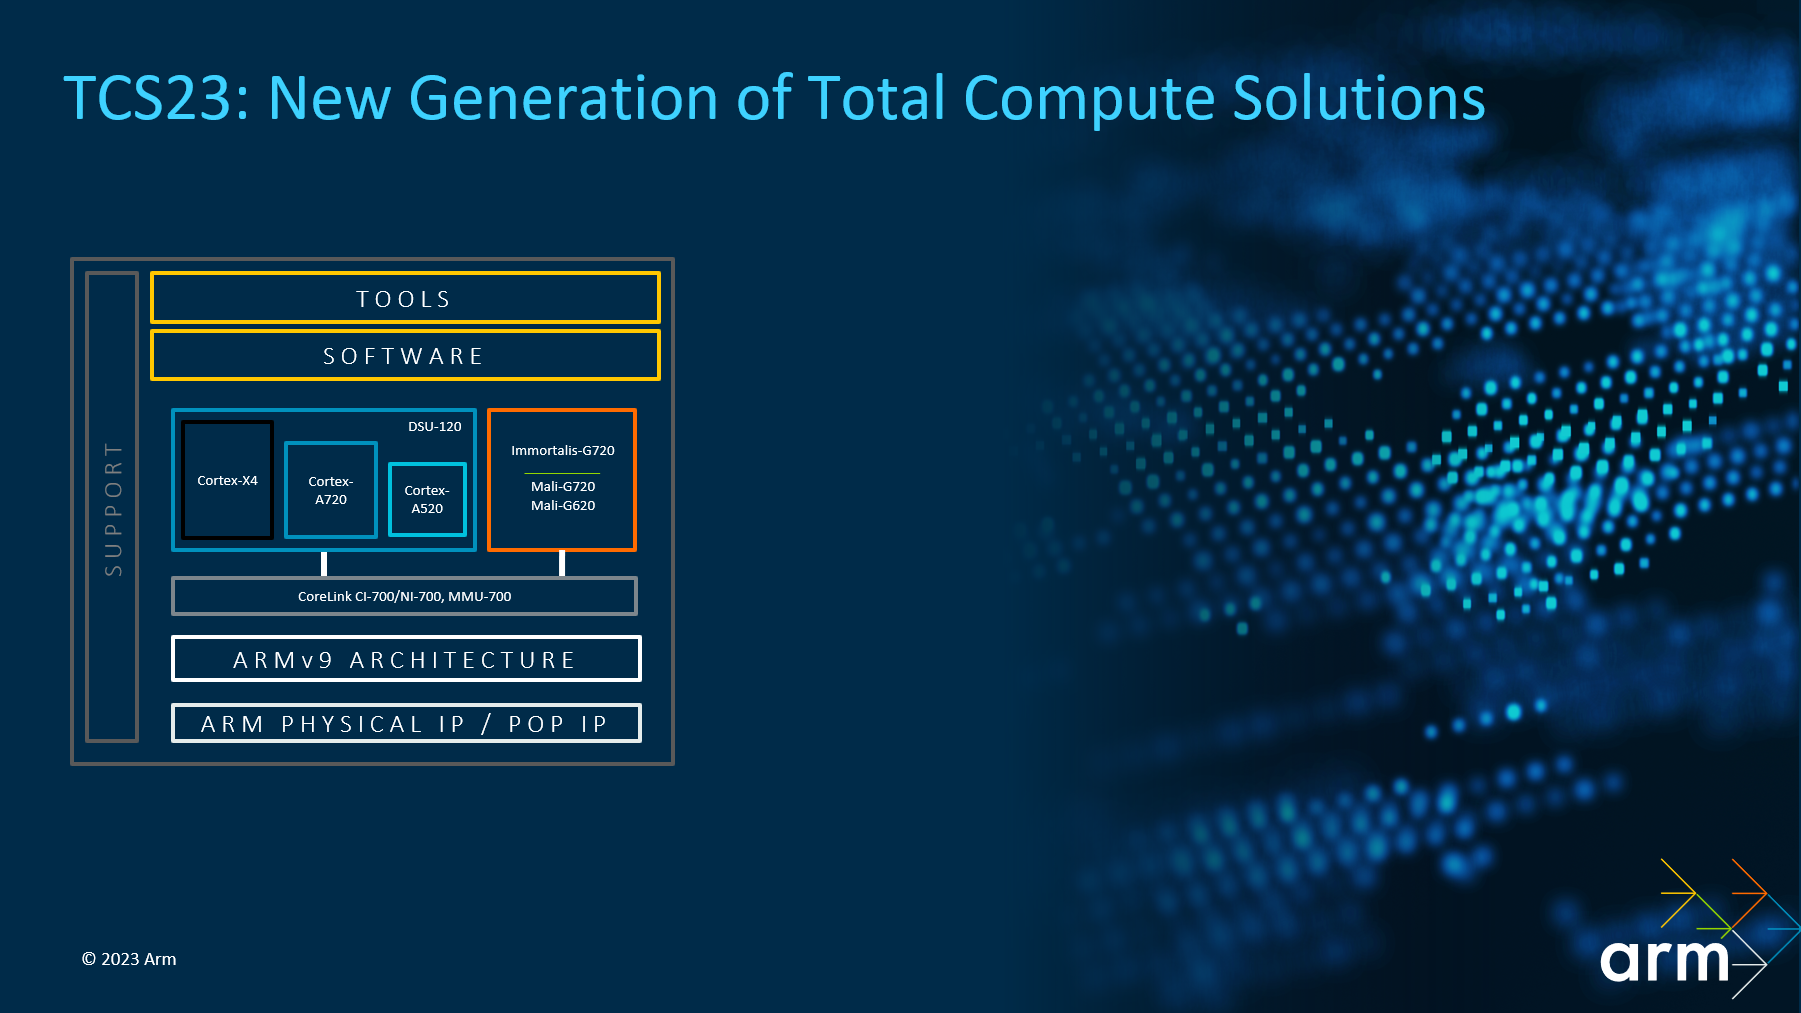 The new generation of Arm Total Compute Solutions